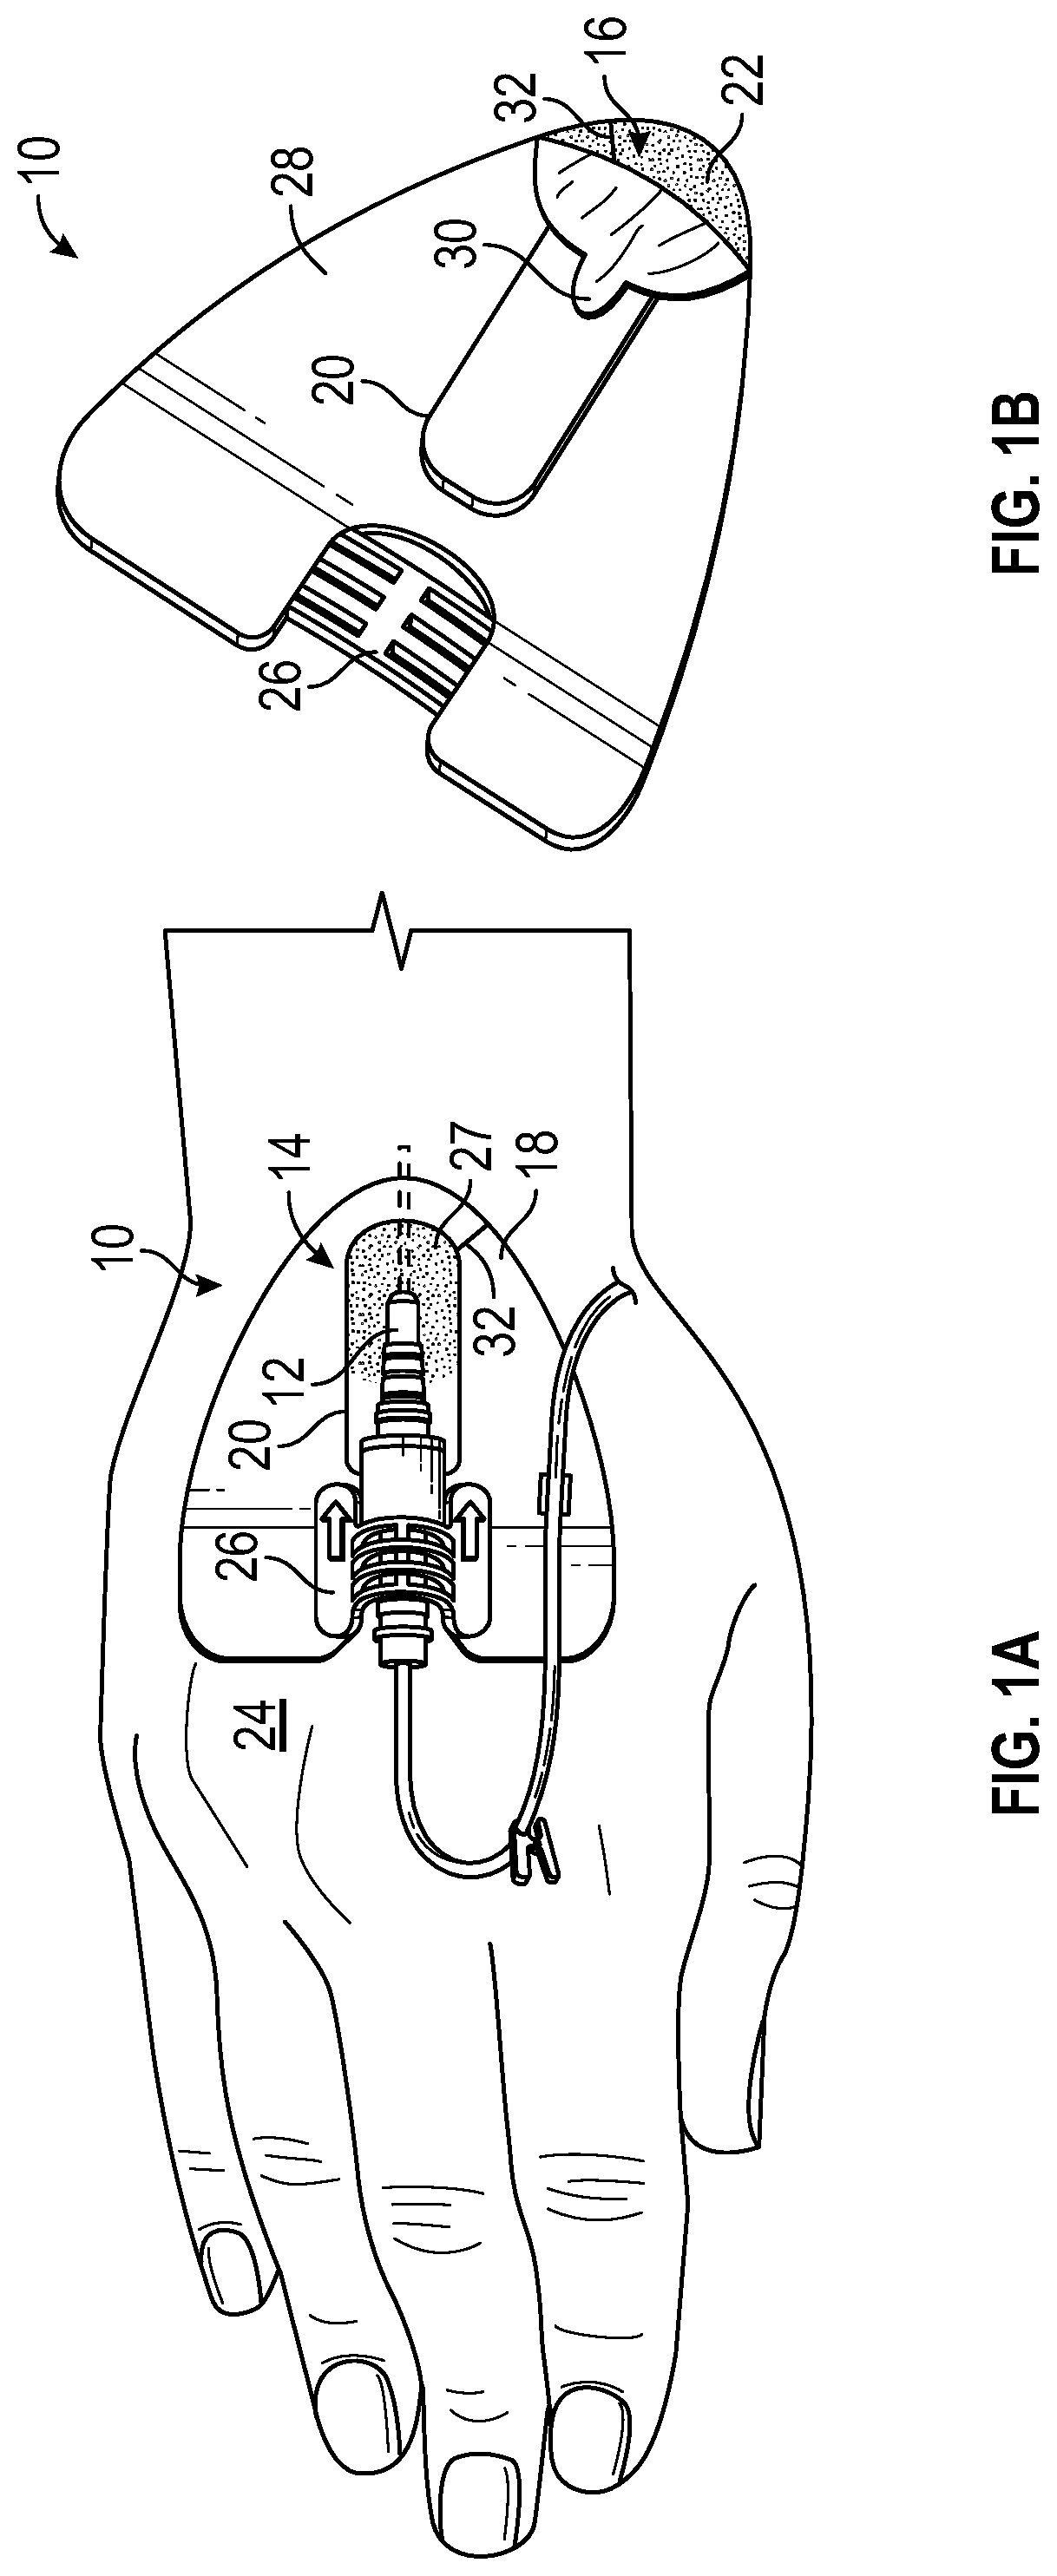 Catheter securement device with window